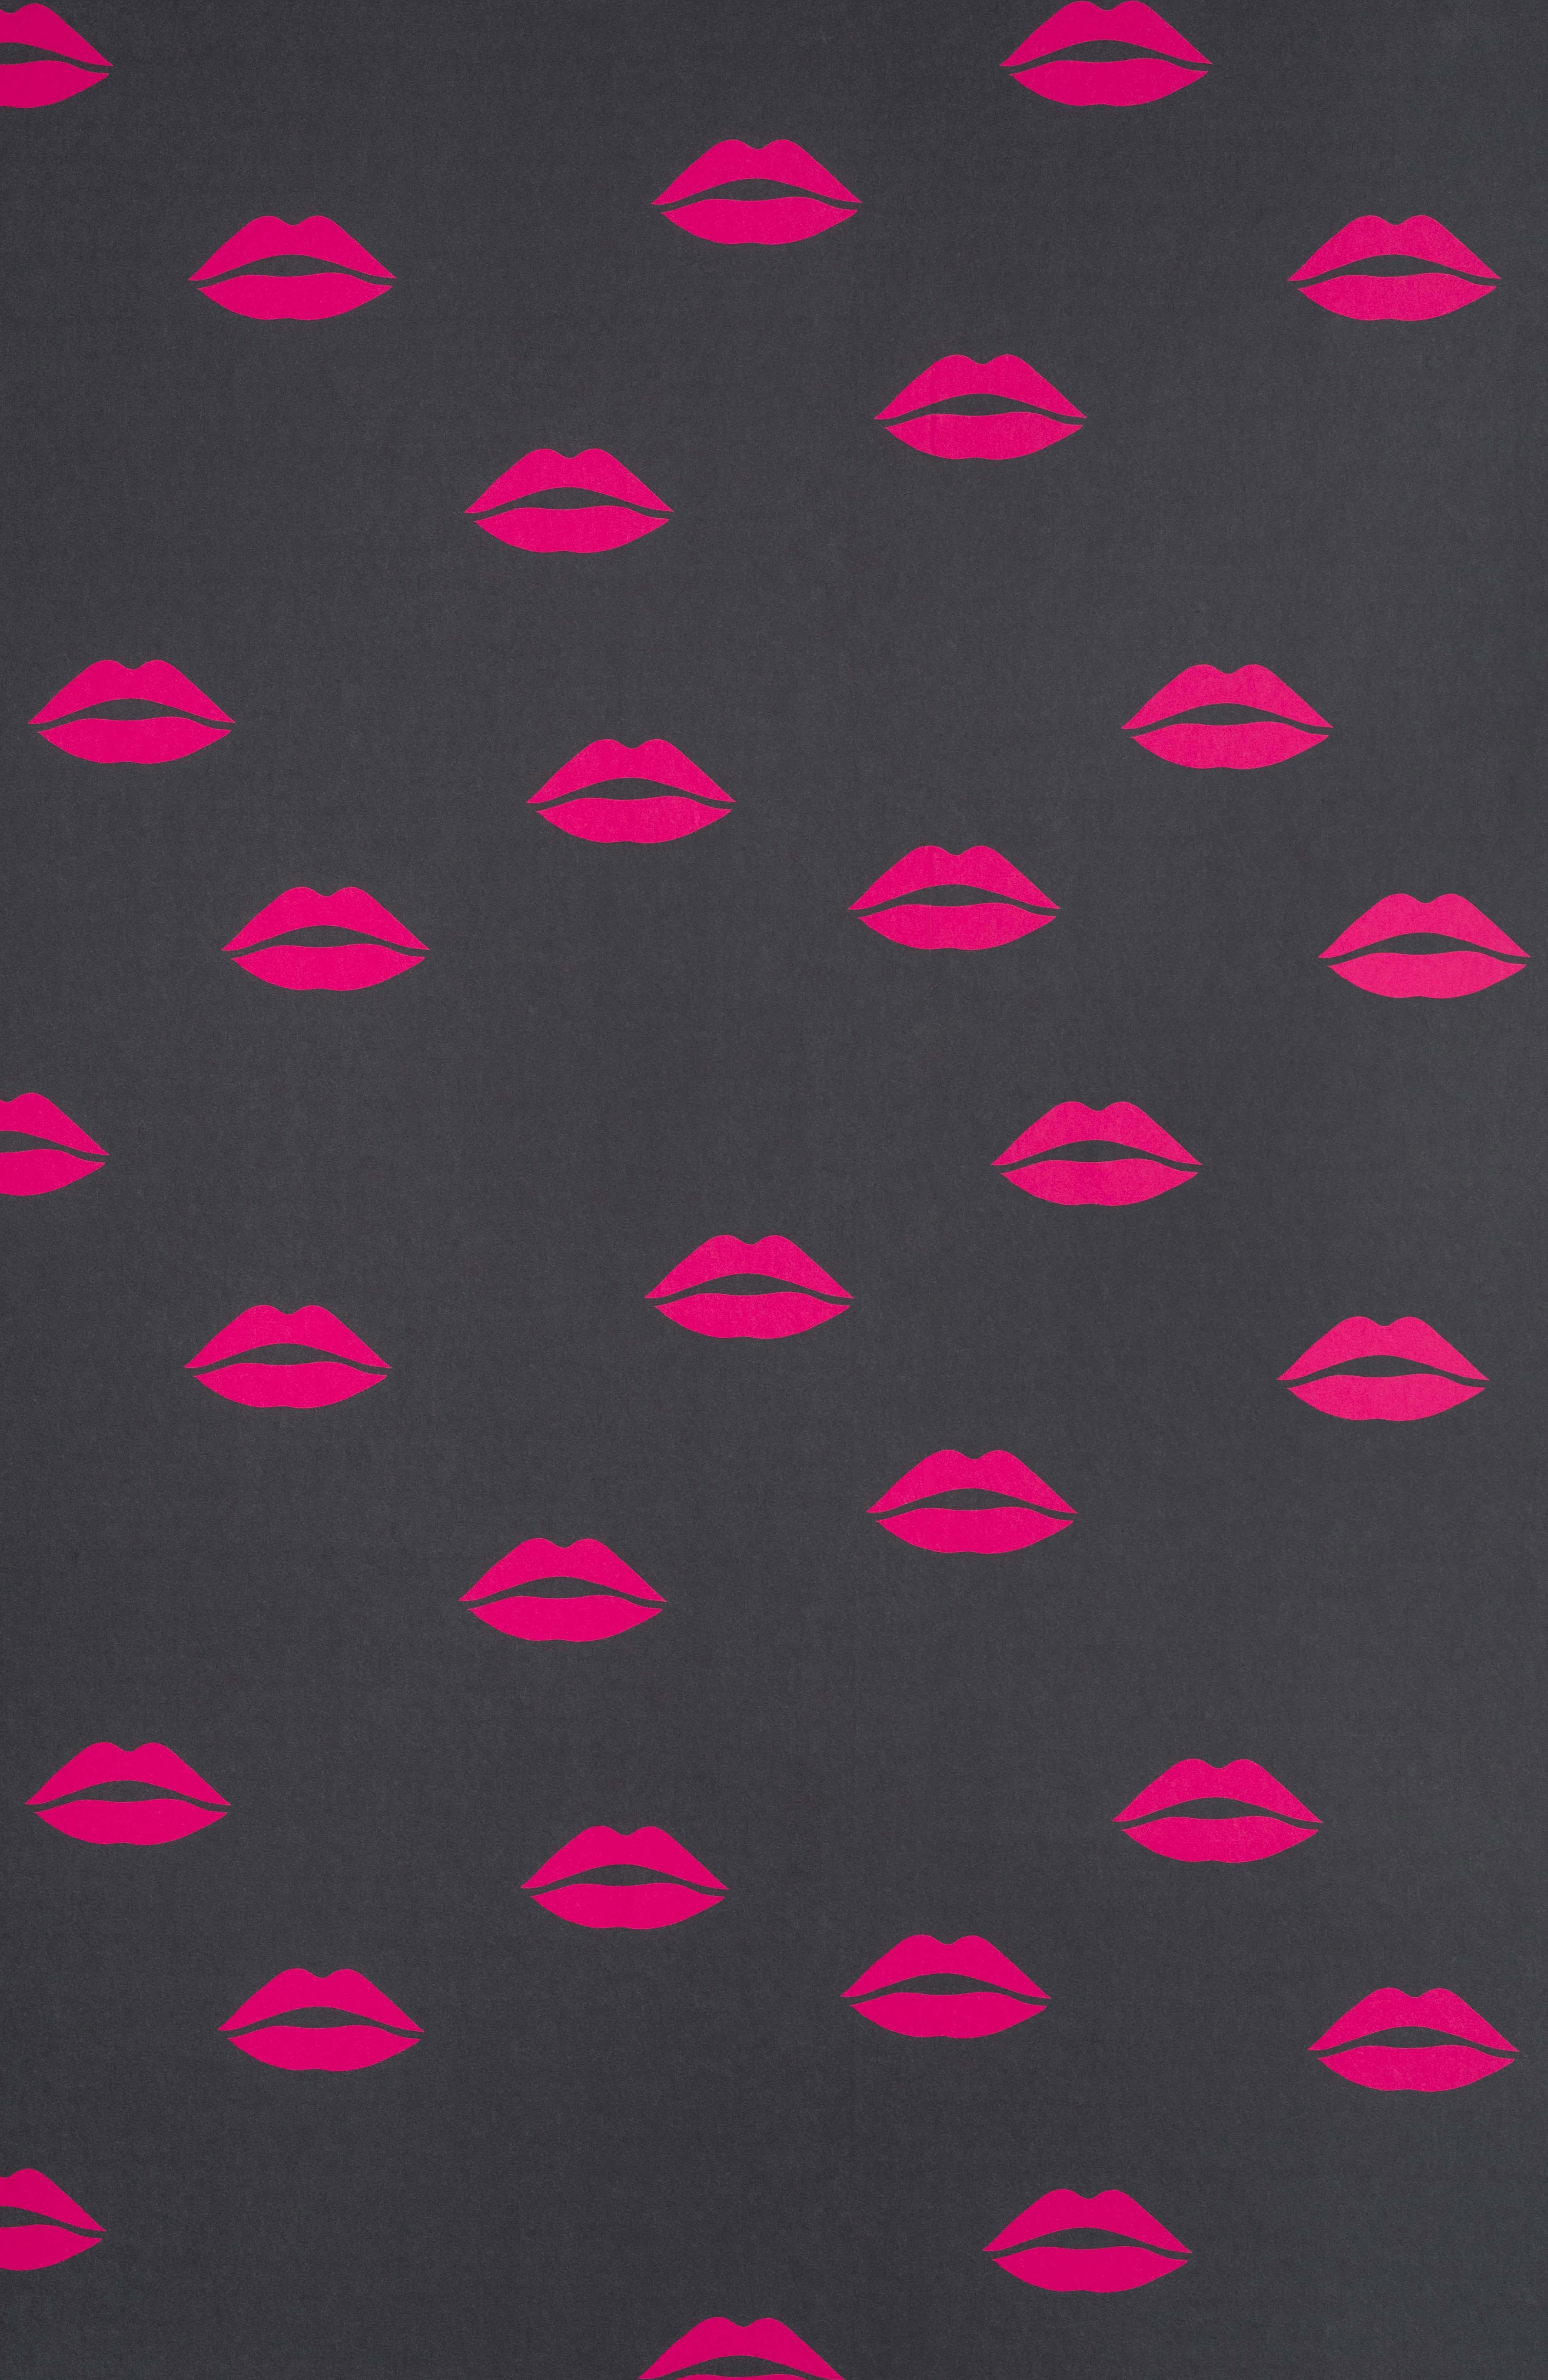 Tabitha Webb for Barneby Gates

Color: Hot Pink on Grey (also available in Red on Cream)
Trim width: 52cm/20.5 inches
Roll length: 10m
Pattern repeat: Straight 
Match length: 52cm/20.5 inches

Please get in touch to order a sample.

We’ve